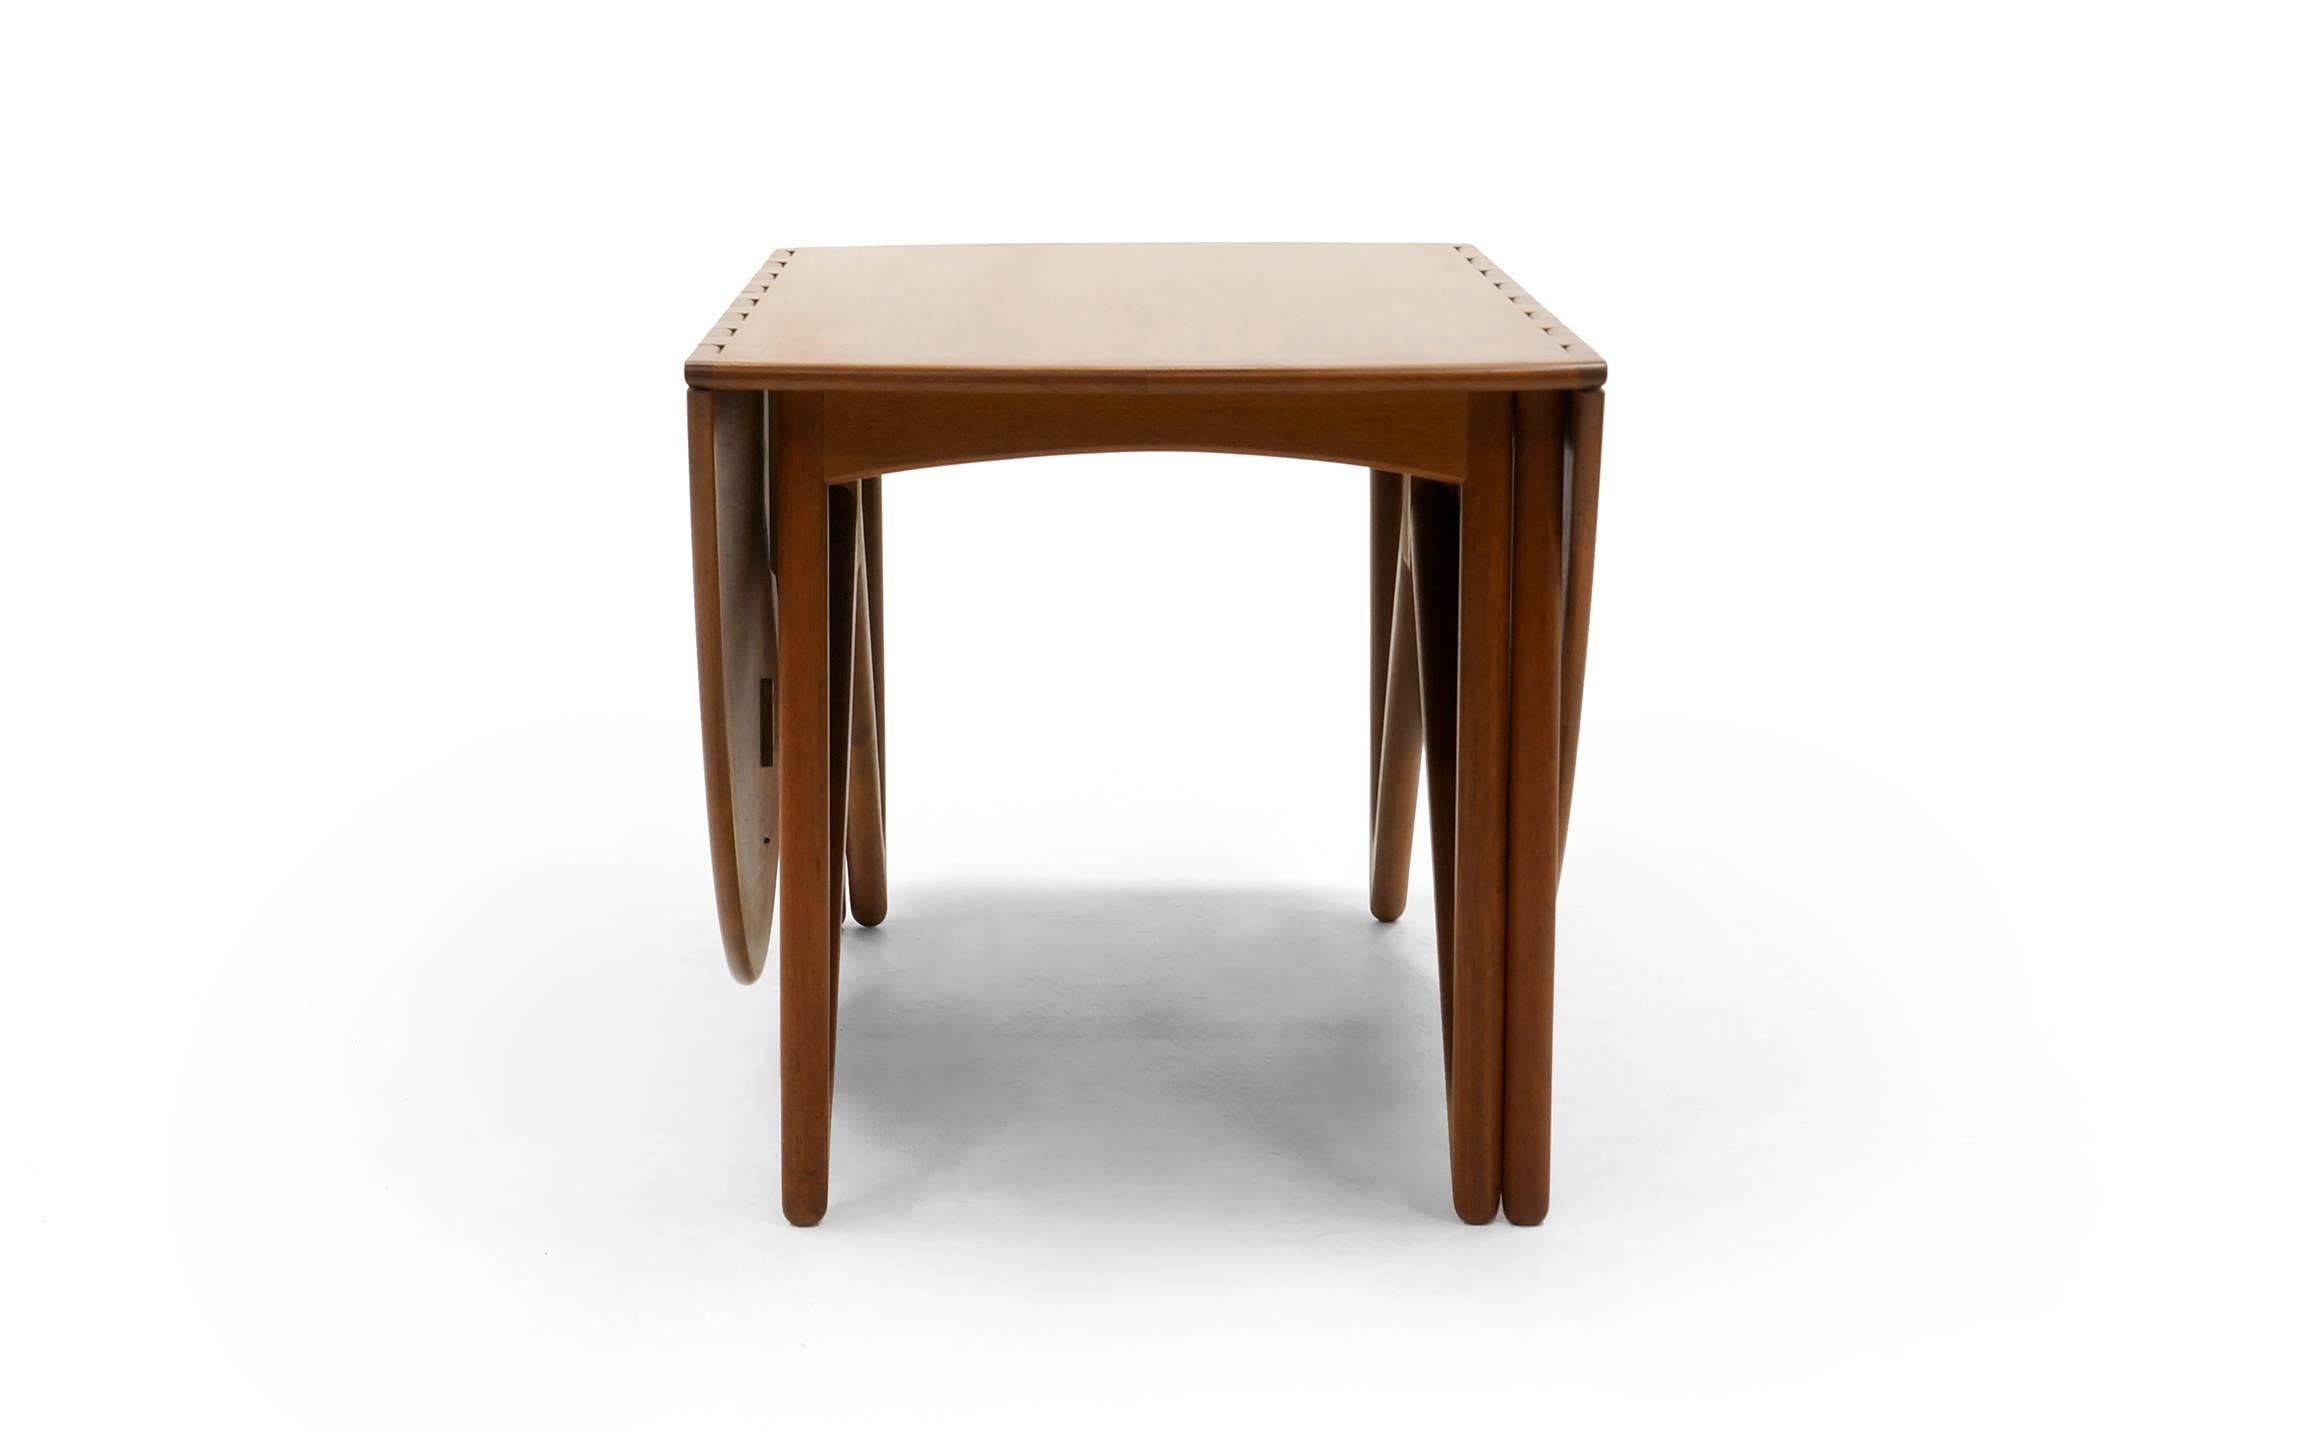 Kurt Ostervig sculptural base gateleg dining table. Expertly refinished. Beautiful. 
Collapsed the table is 28.5 inches wide. Fully extended, 77.5 inches wide.